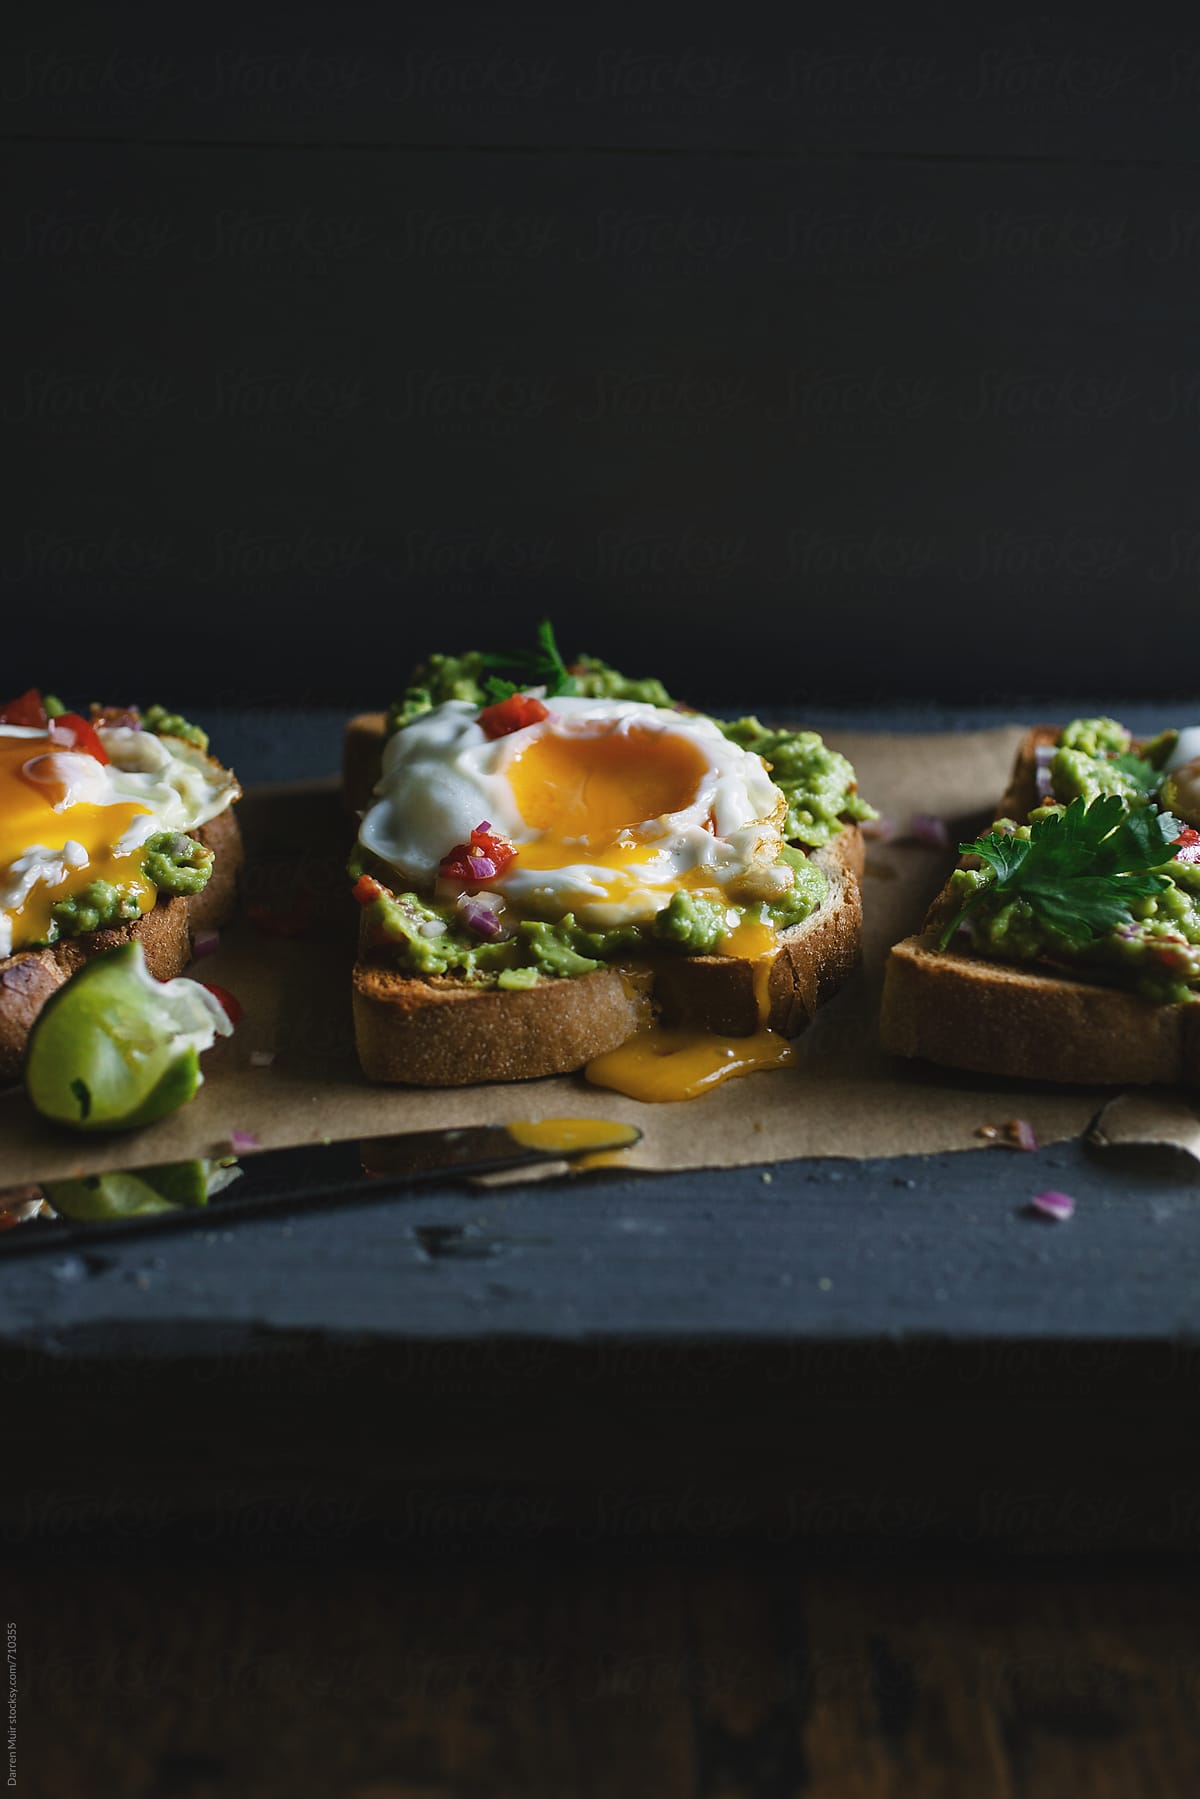 Avocado and fried egg toasts on a table.